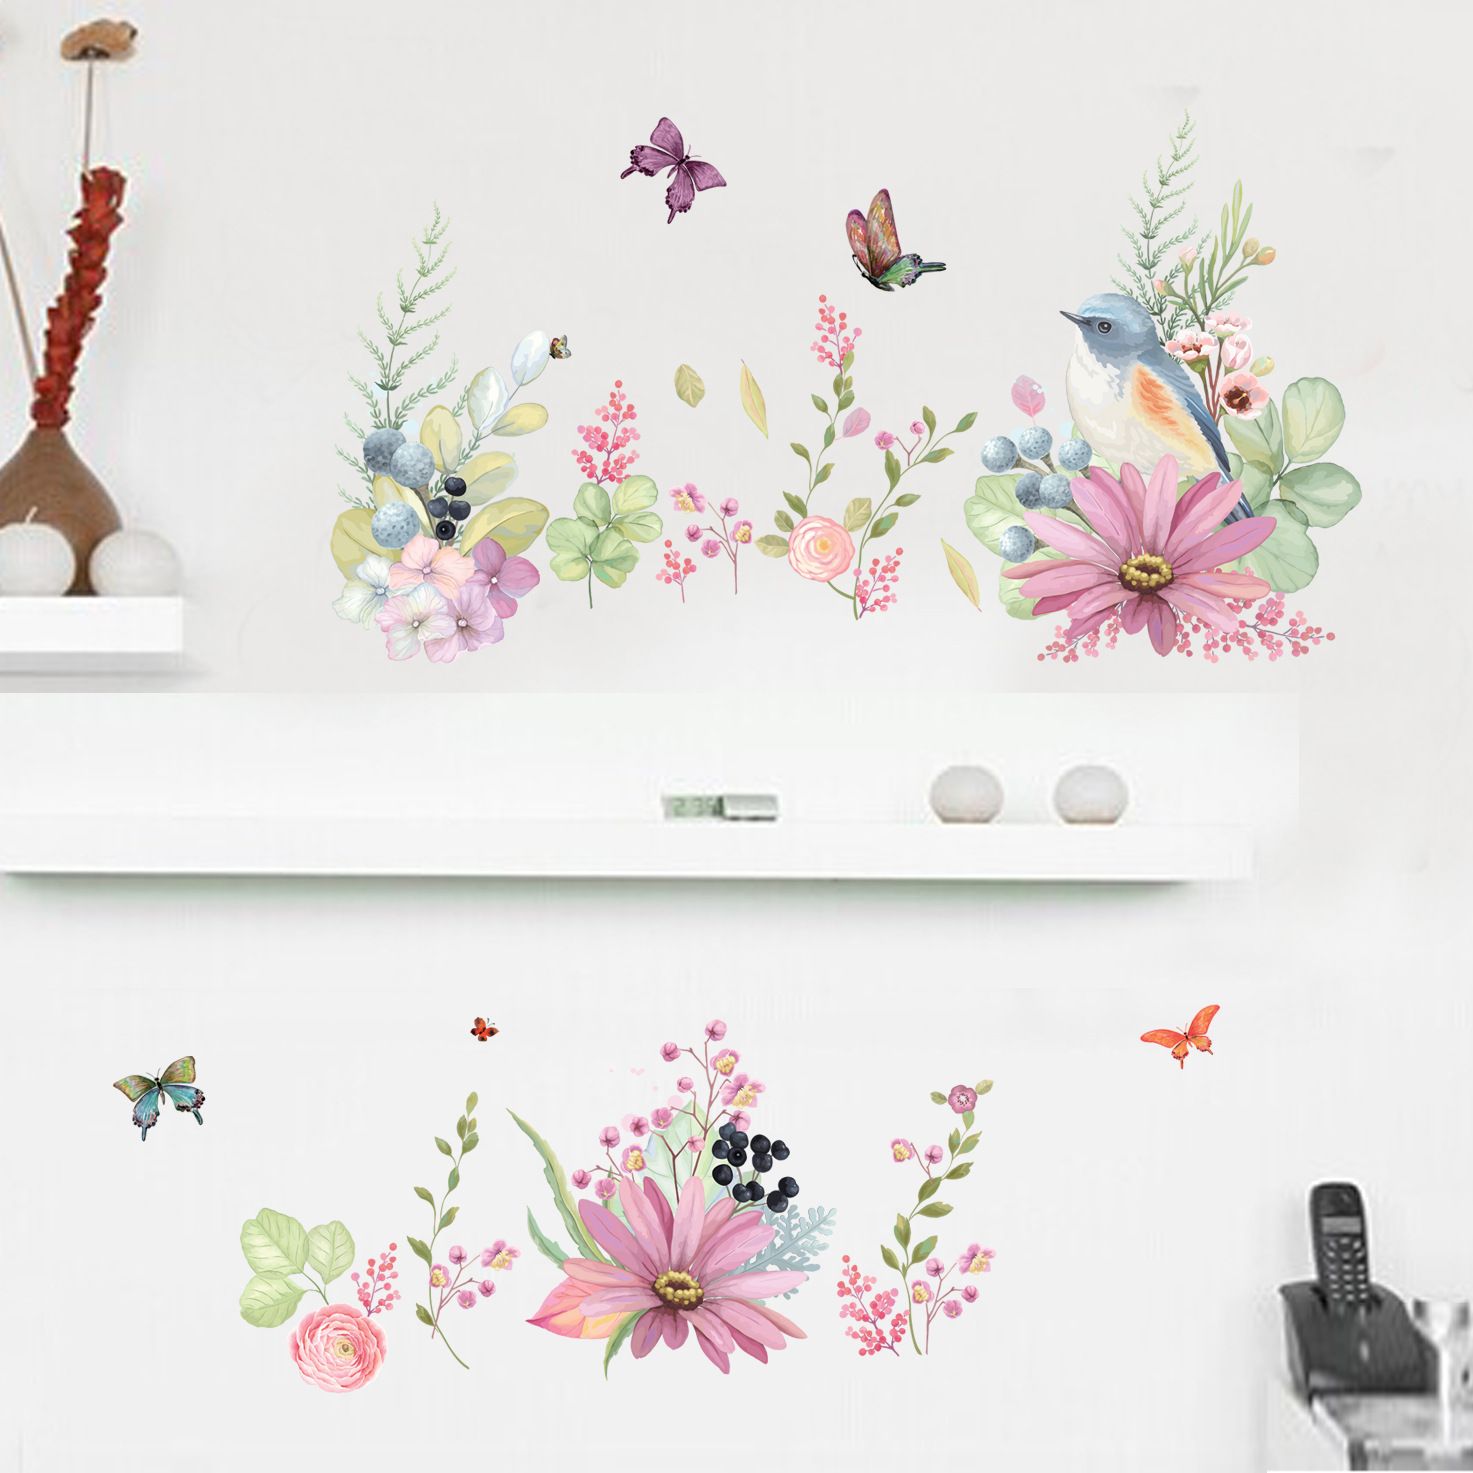 Flowers Bird Butterfly Home Room Decor Removable Wall Stickers Decal Decoration